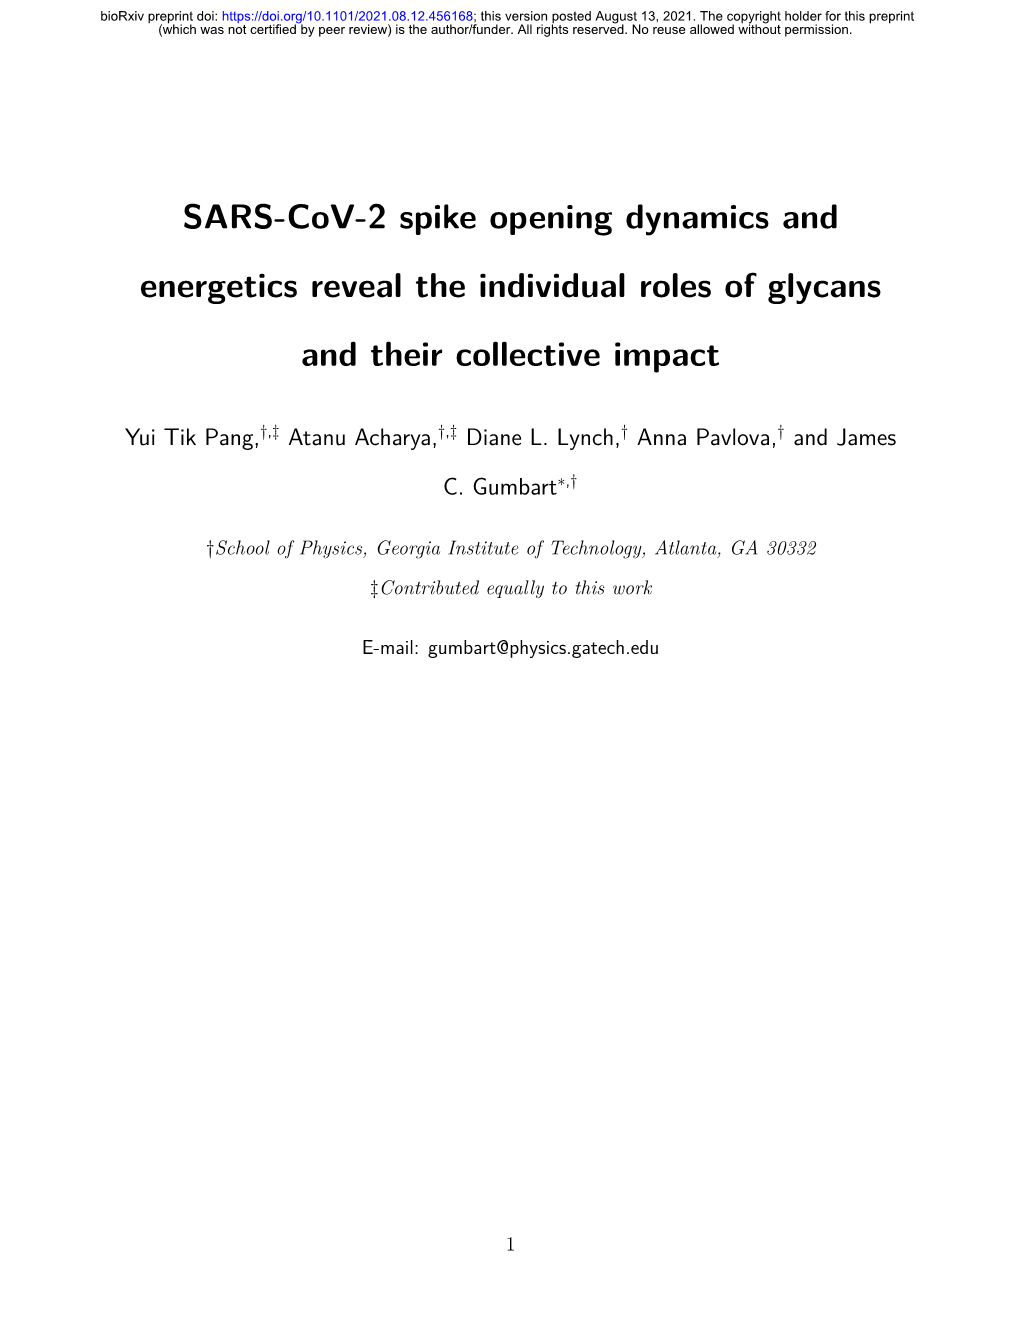 SARS-Cov-2 Spike Opening Dynamics and Energetics Reveal the Individual Roles of Glycans and Their Collective Impact